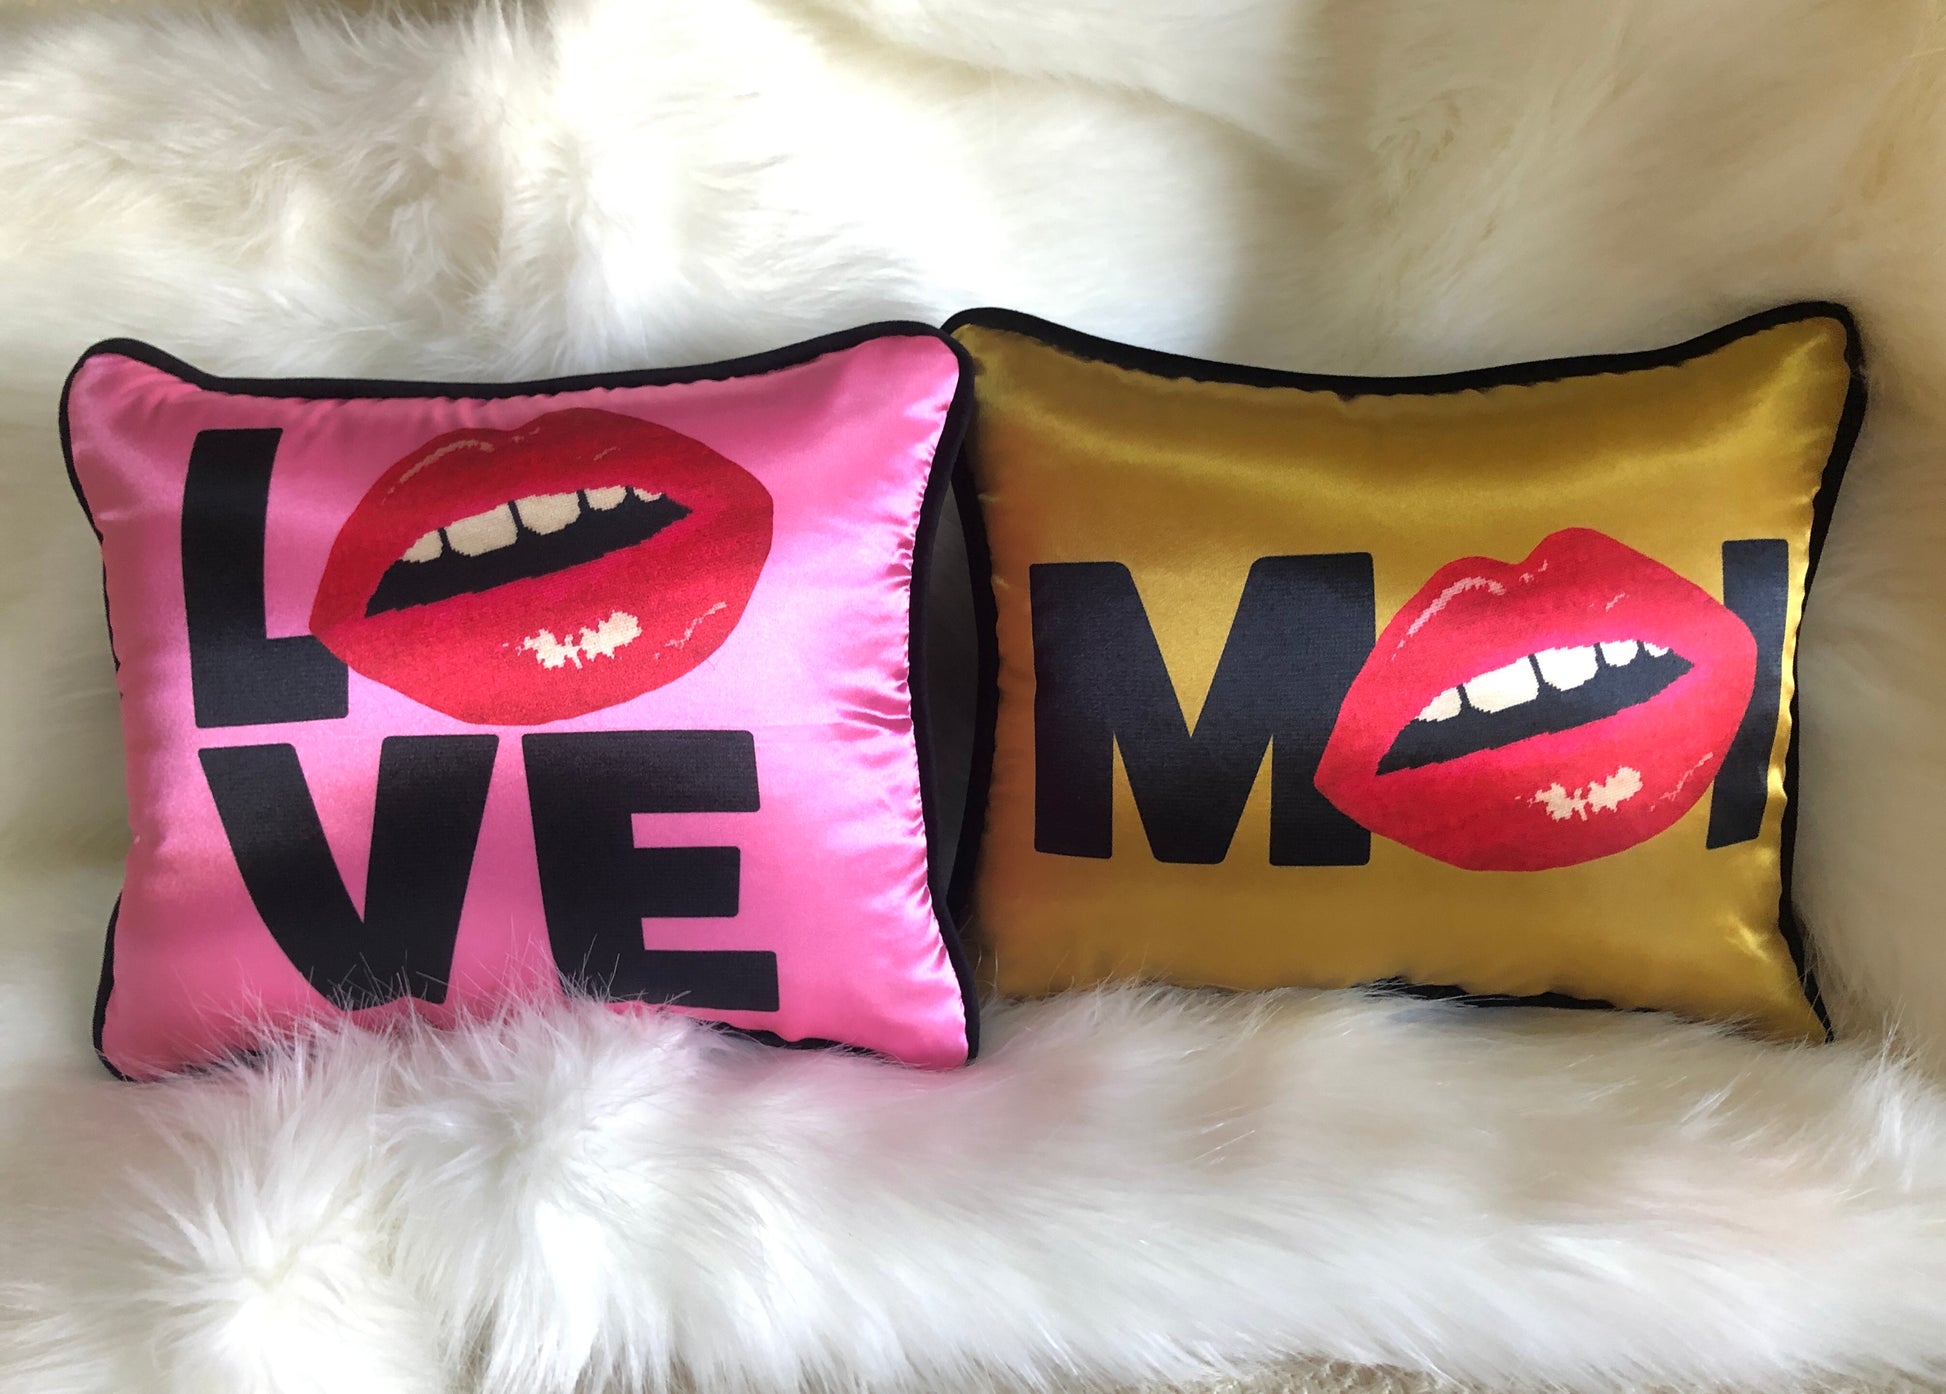 hot pink pillow with blackletters - L, red lips for an O, V & E stacked underneath & gold pillow with M (lips) I